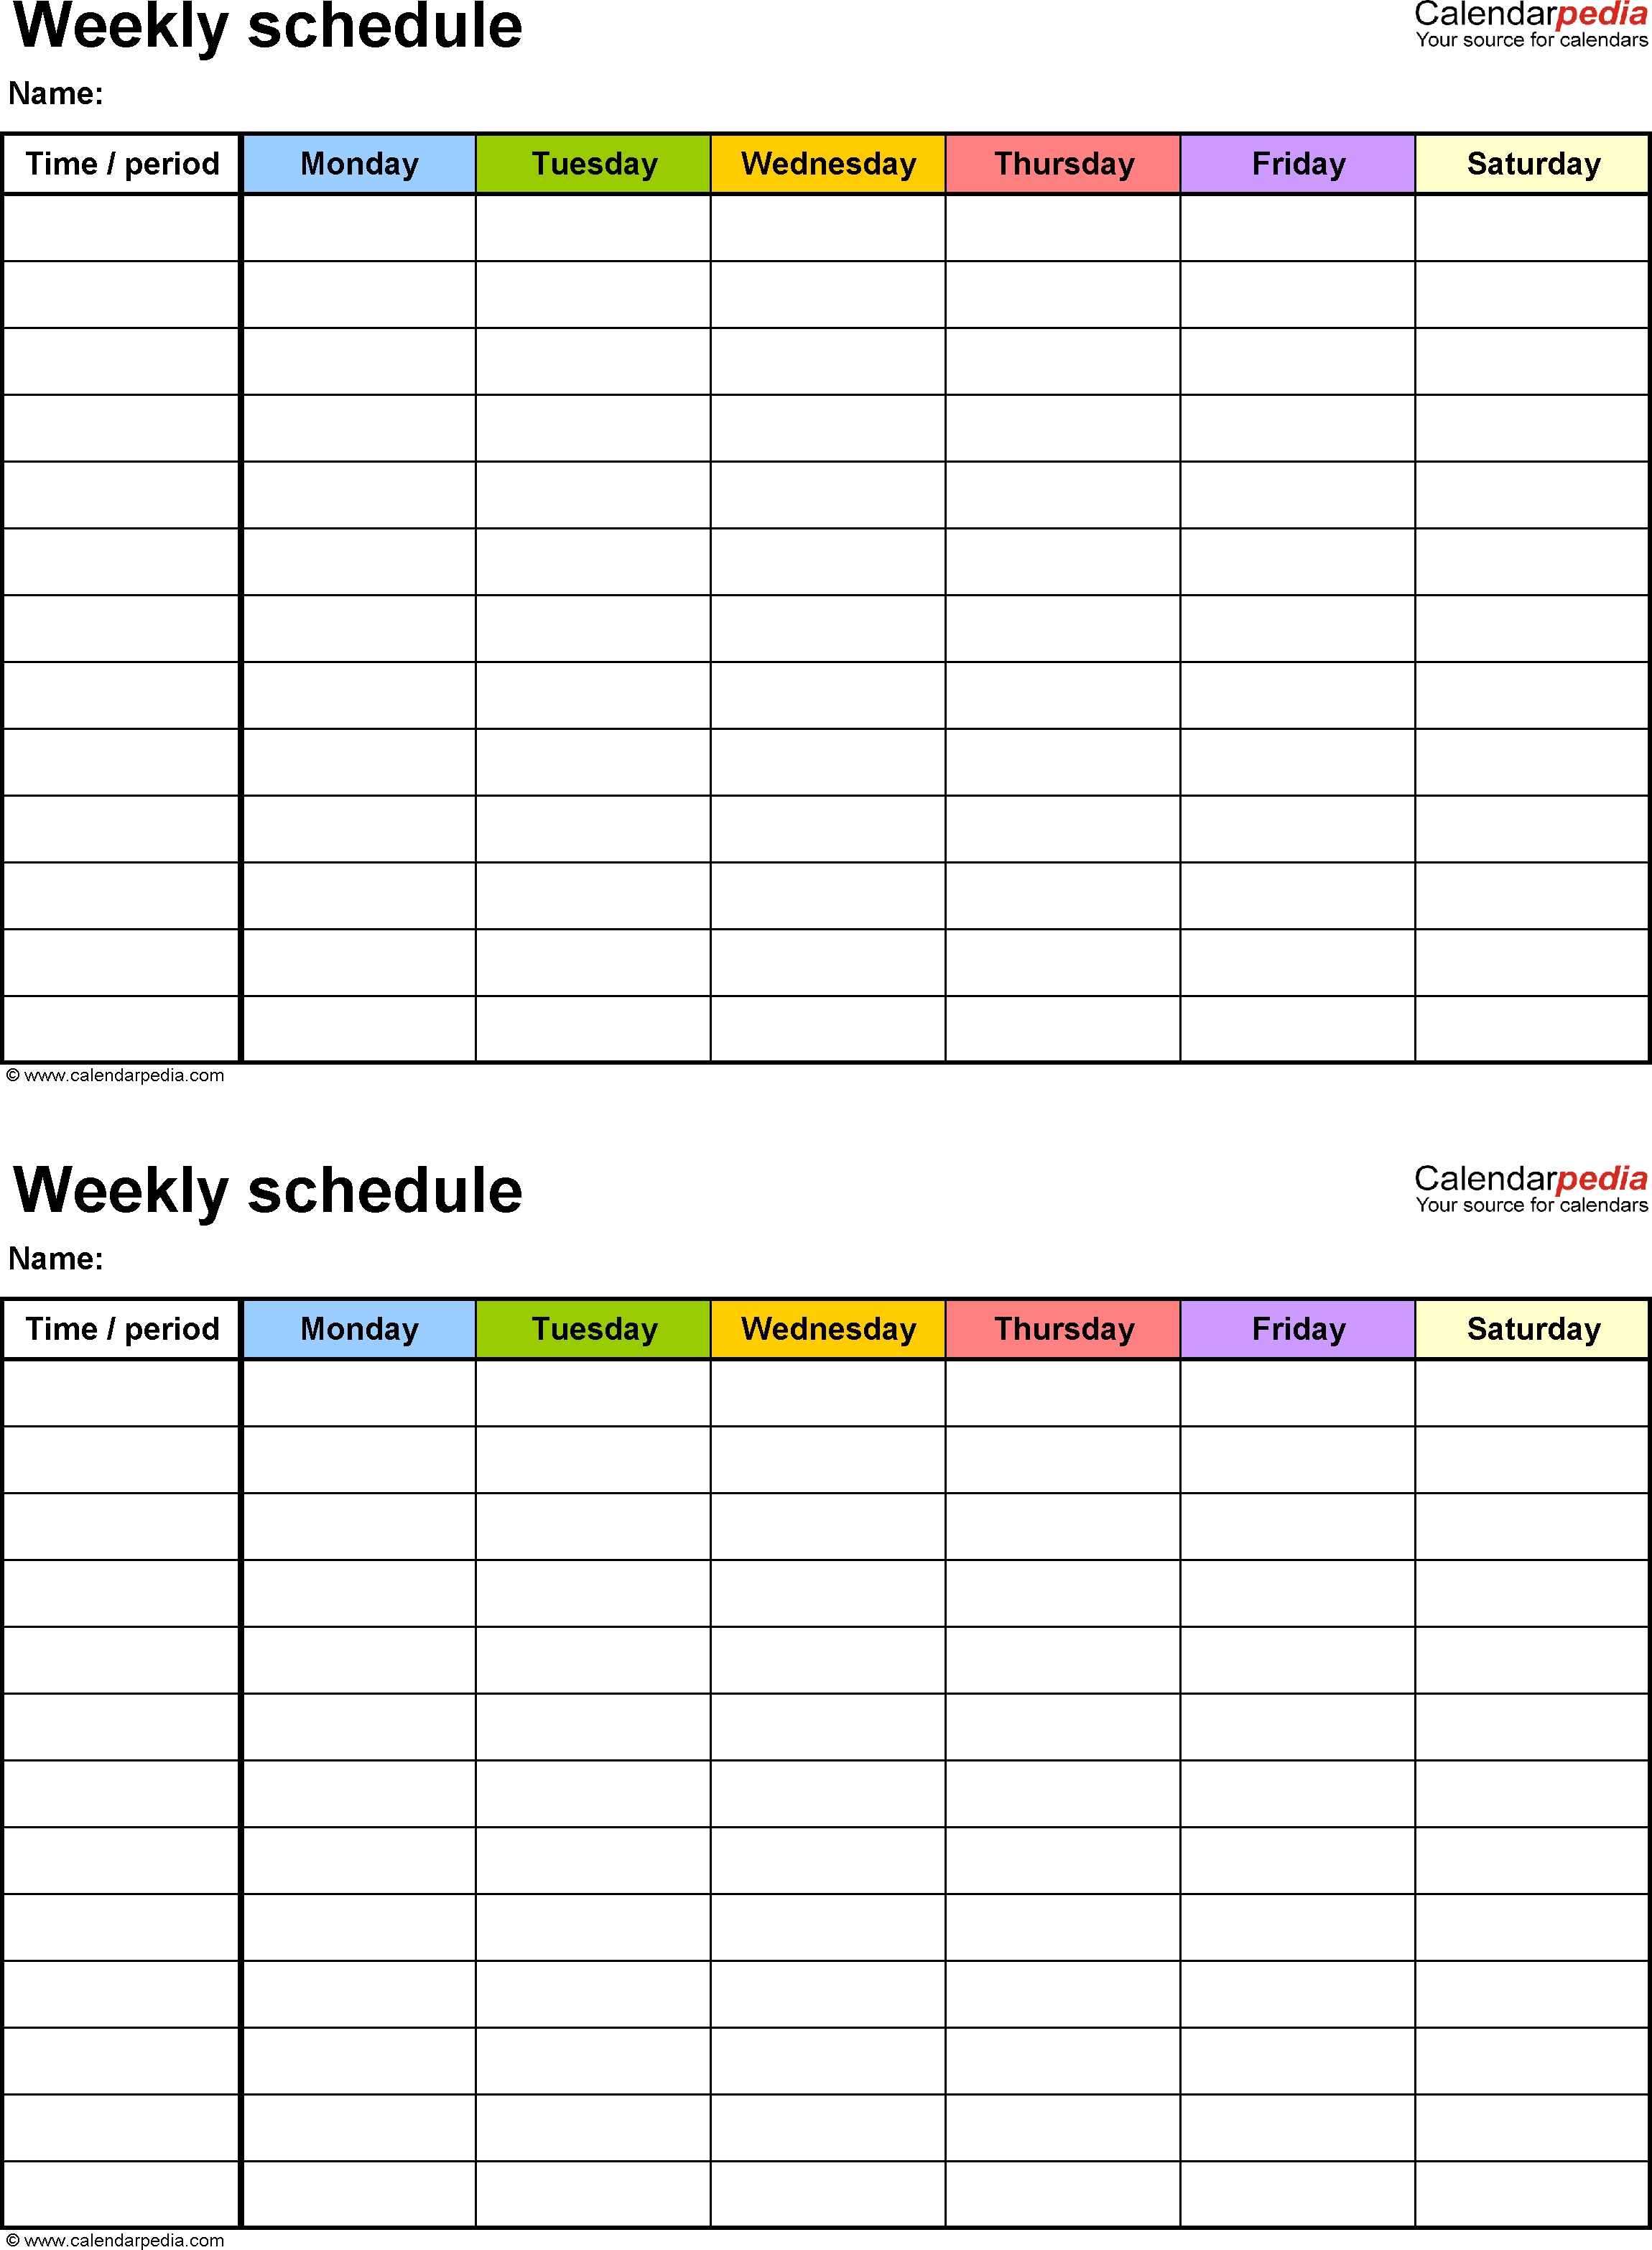 Free Weekly Schedule Templates For Word - 18 Templates Free 6 Week Calendar Template